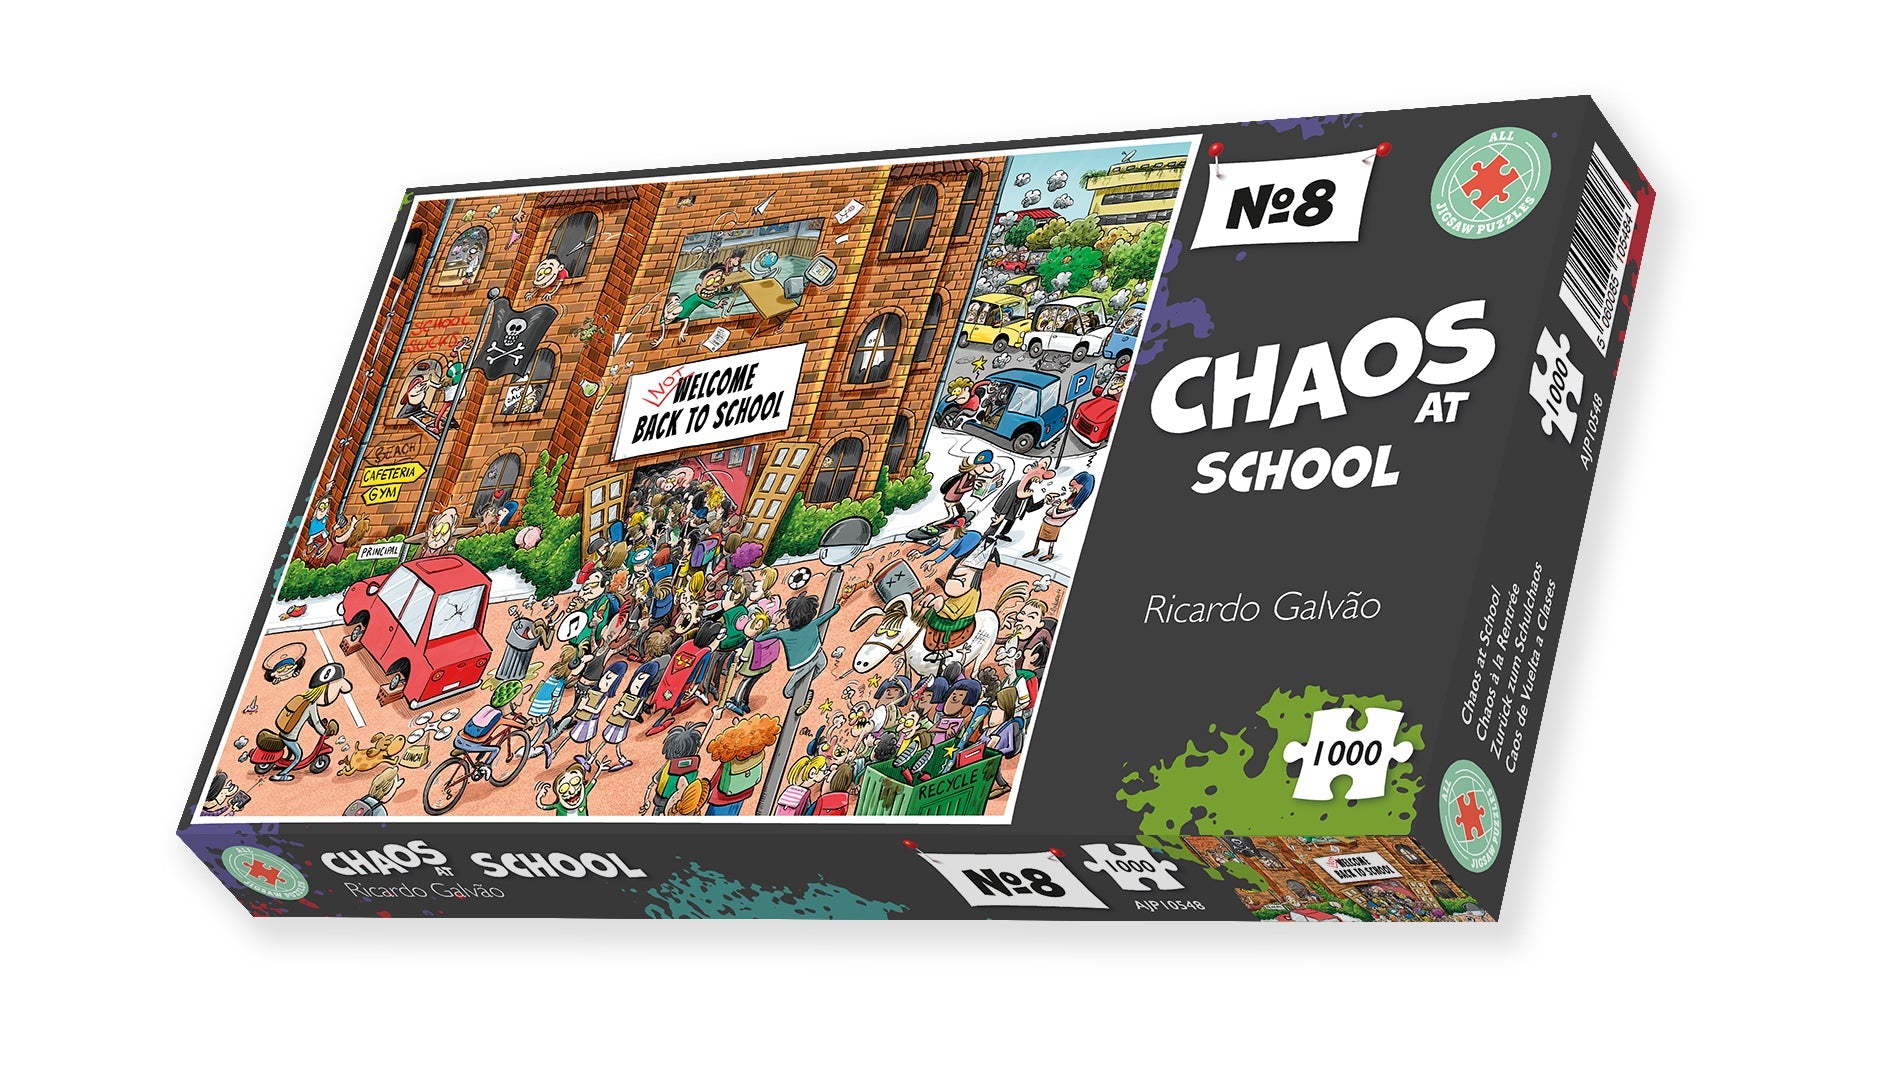 Back to School Chaos- No. 8 1000 Piece Jigsaw Puzzles